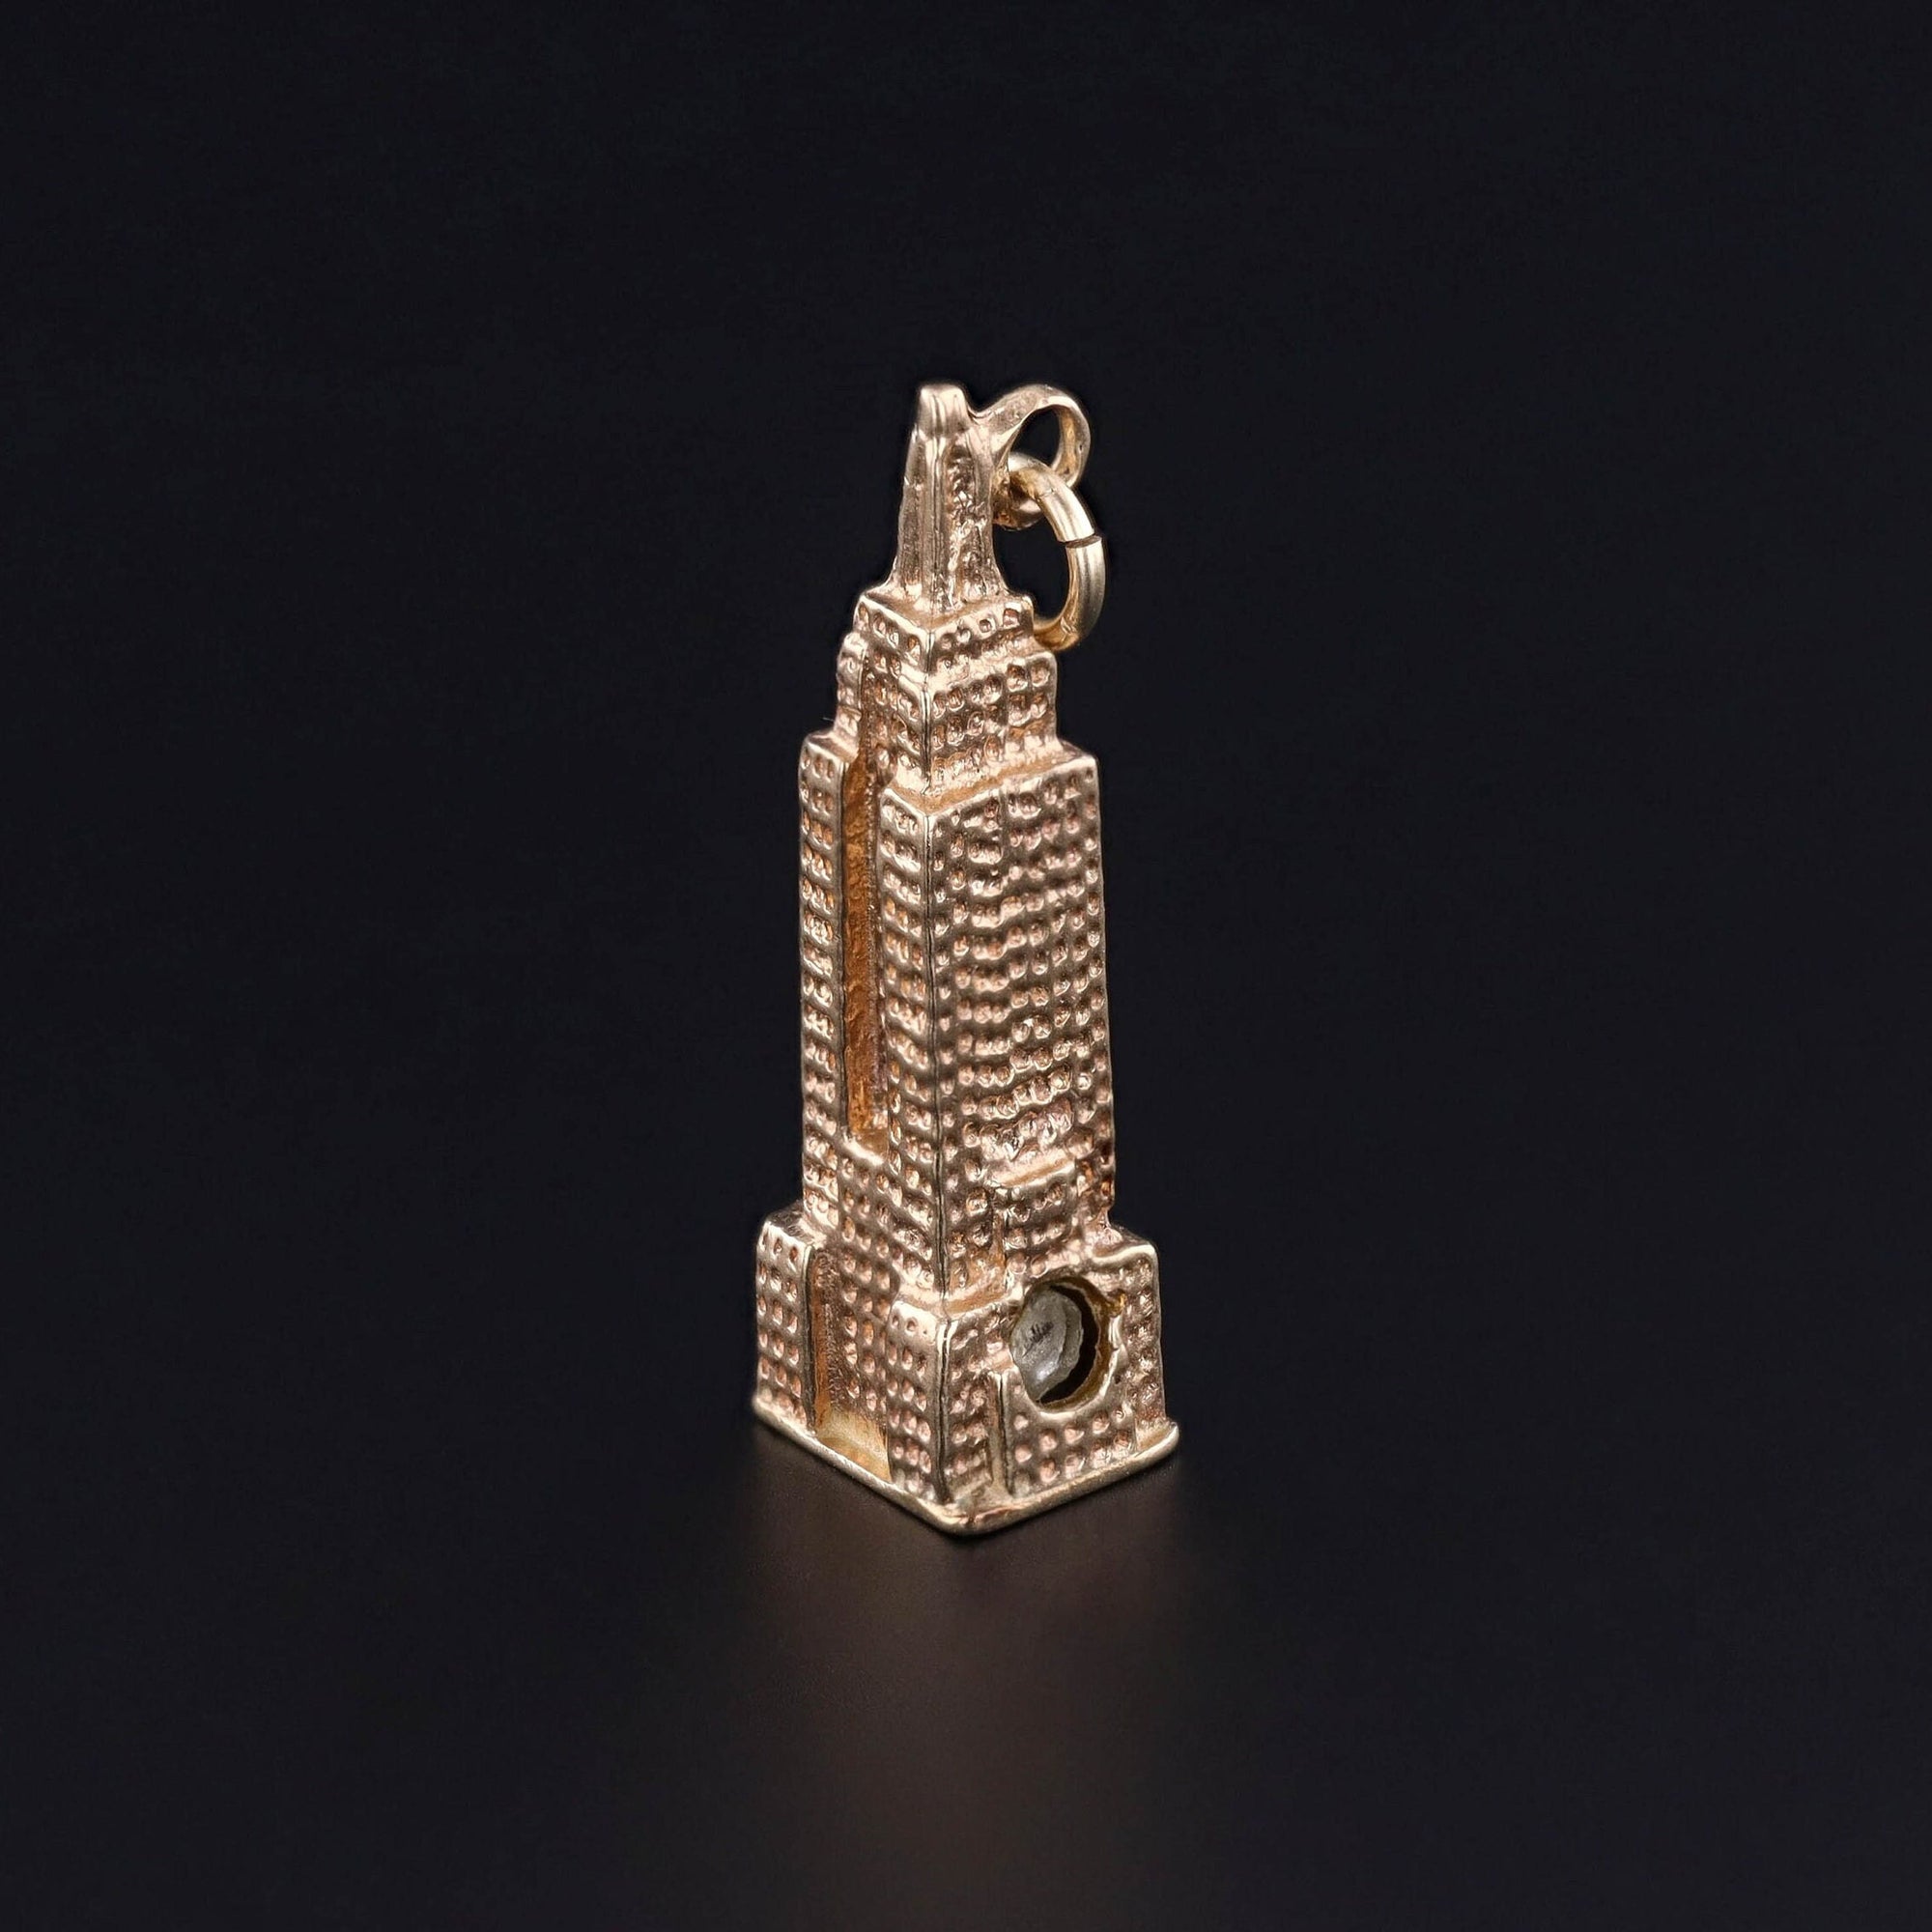 Vintage Empire State Building Stanhope Charm of 14k Gold